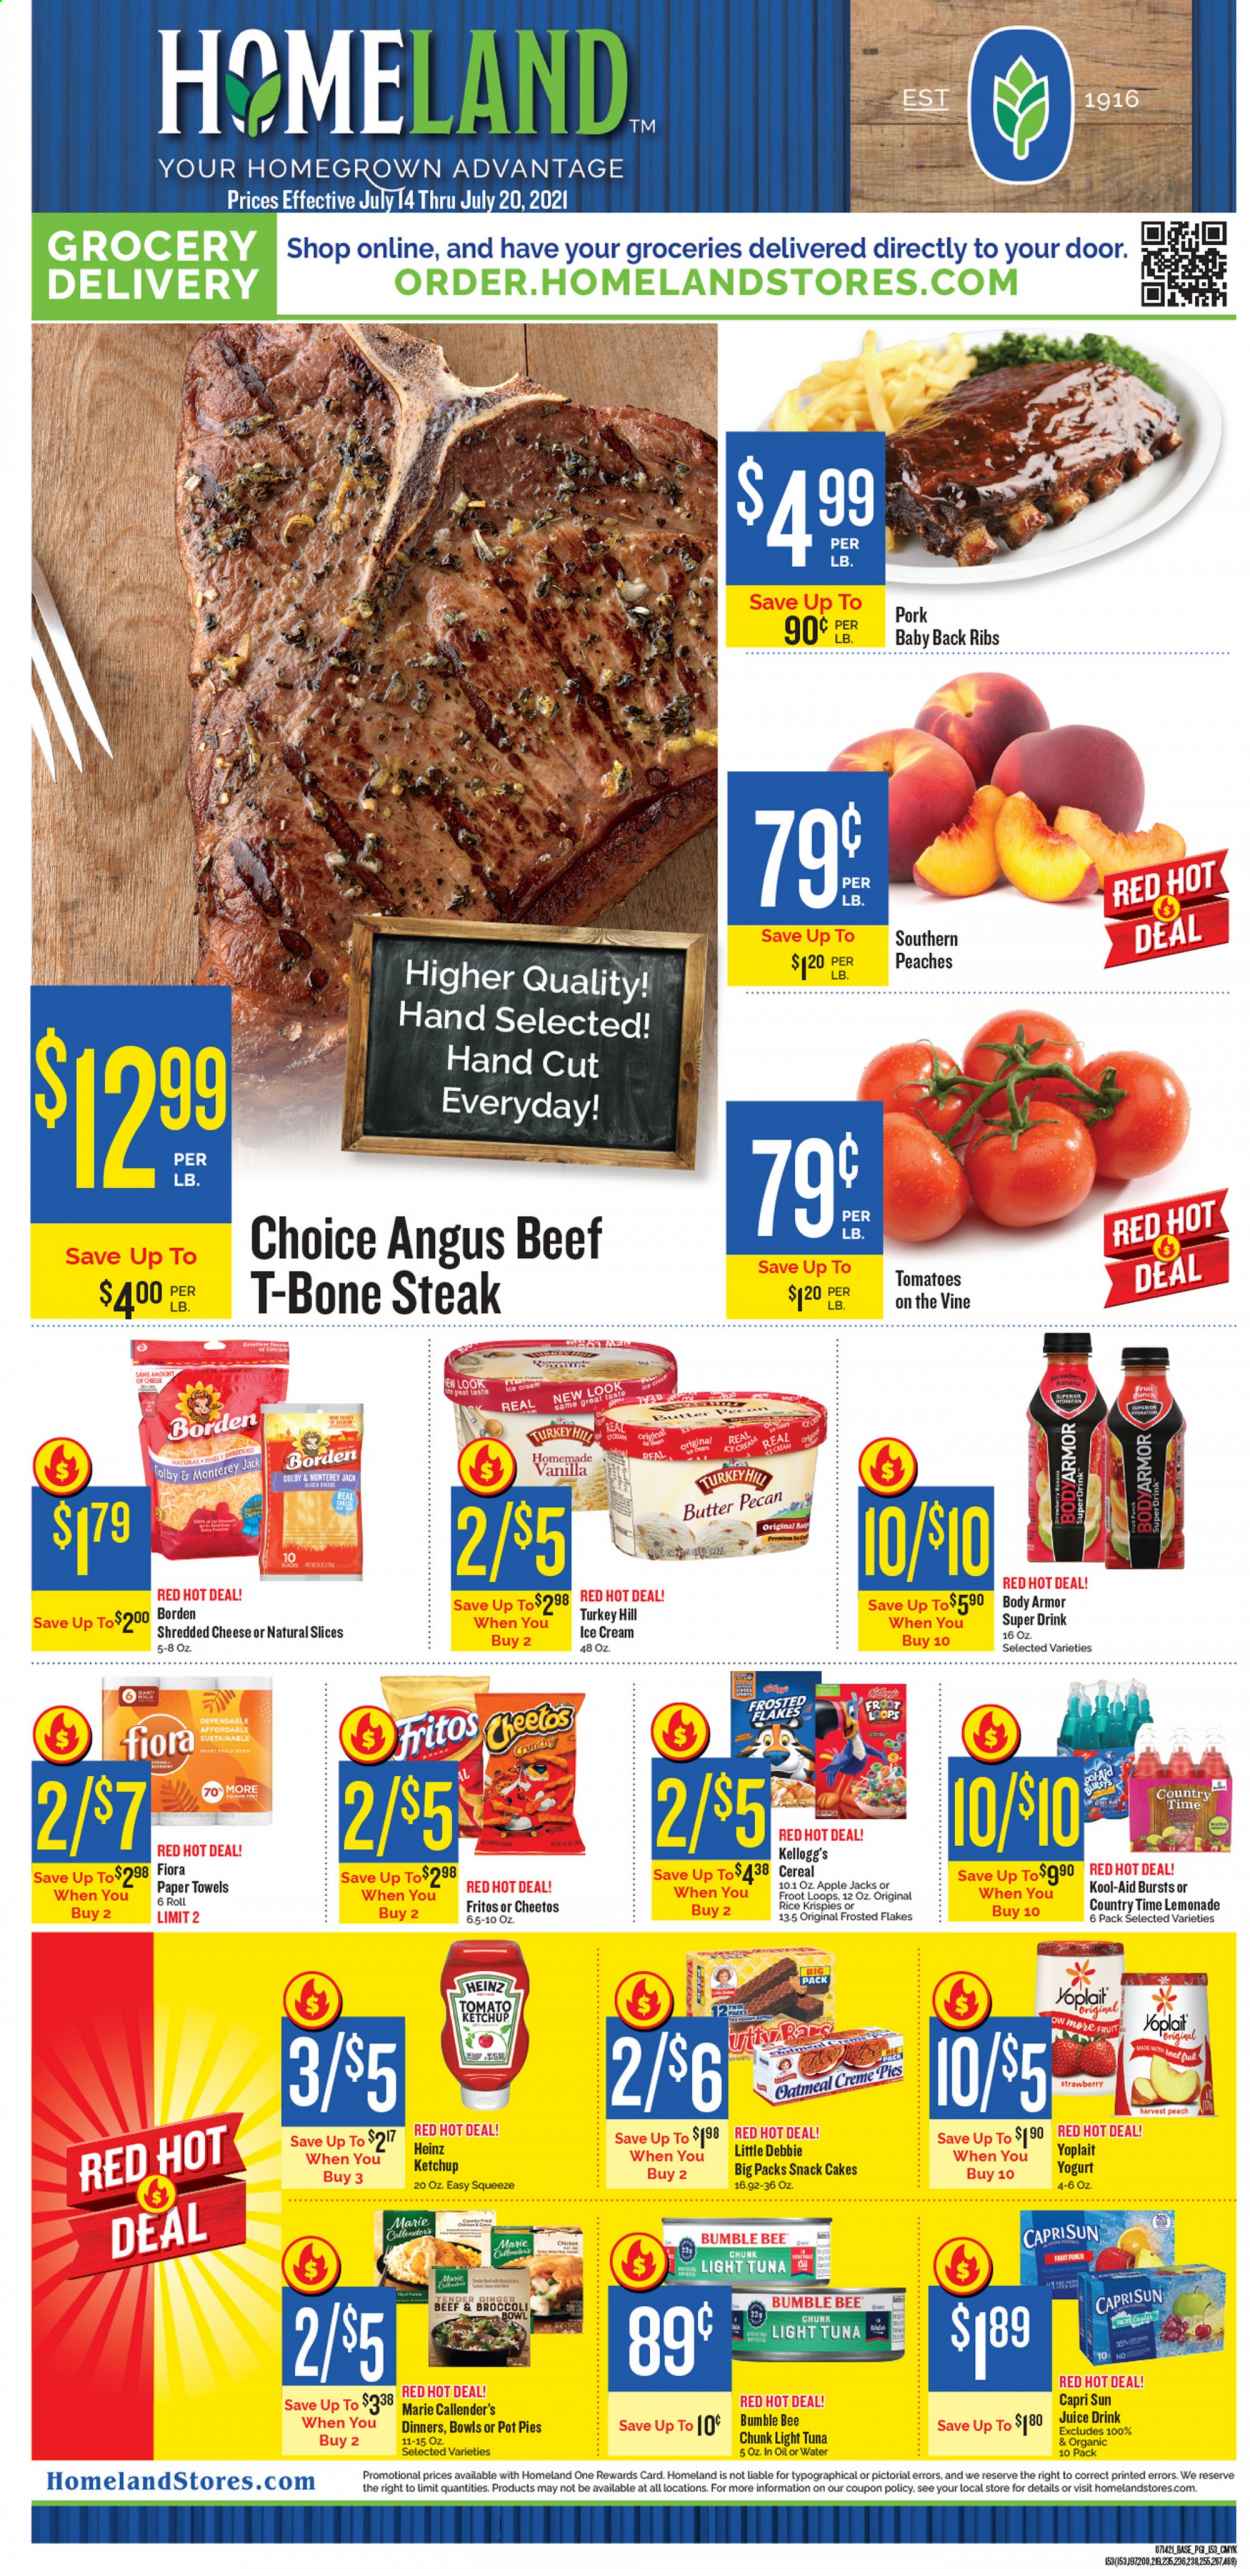 thumbnail - Homeland Flyer - 07/14/2021 - 07/20/2021 - Sales products - cake, pot pie, broccoli, ginger, tomatoes, tuna, Bumble Bee, Marie Callender's, Colby cheese, Monterey Jack cheese, shredded cheese, yoghurt, Yoplait, butter, ice cream, Ola, snack, Kellogg's, Fritos, Cheetos, oatmeal, Heinz, light tuna, cereals, Rice Krispies, Frosted Flakes, ketchup, Capri Sun, lemonade, juice, Country Time, fruit punch, beef meat, t-bone steak, steak, pork meat, pork ribs, pork back ribs, kitchen towels, paper towels, peaches. Page 1.